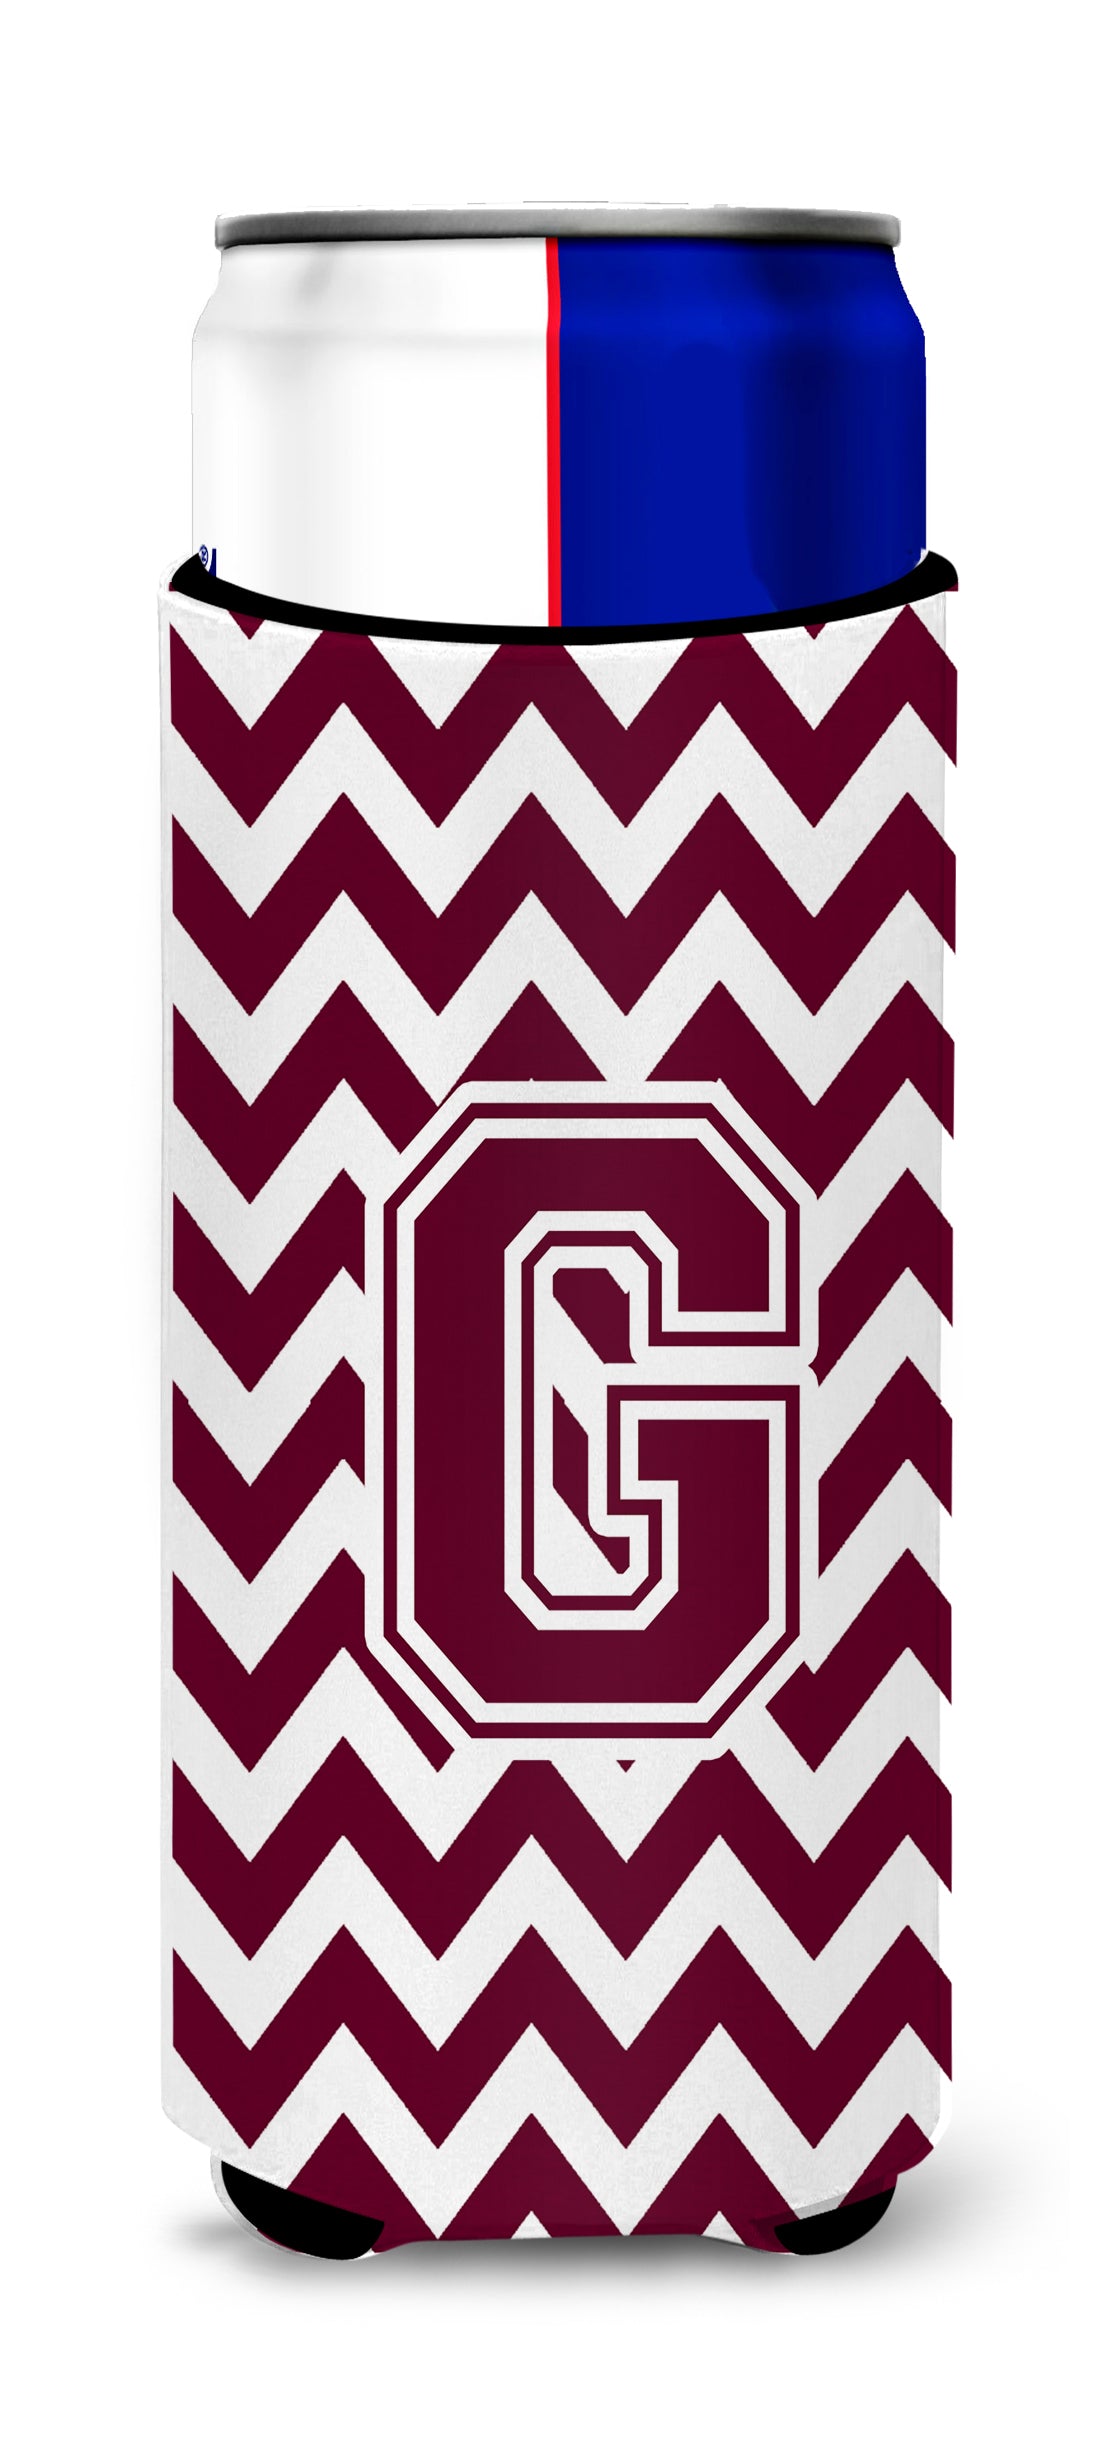 Letter G Chevron Maroon and White  Ultra Beverage Insulators for slim cans CJ1051-GMUK